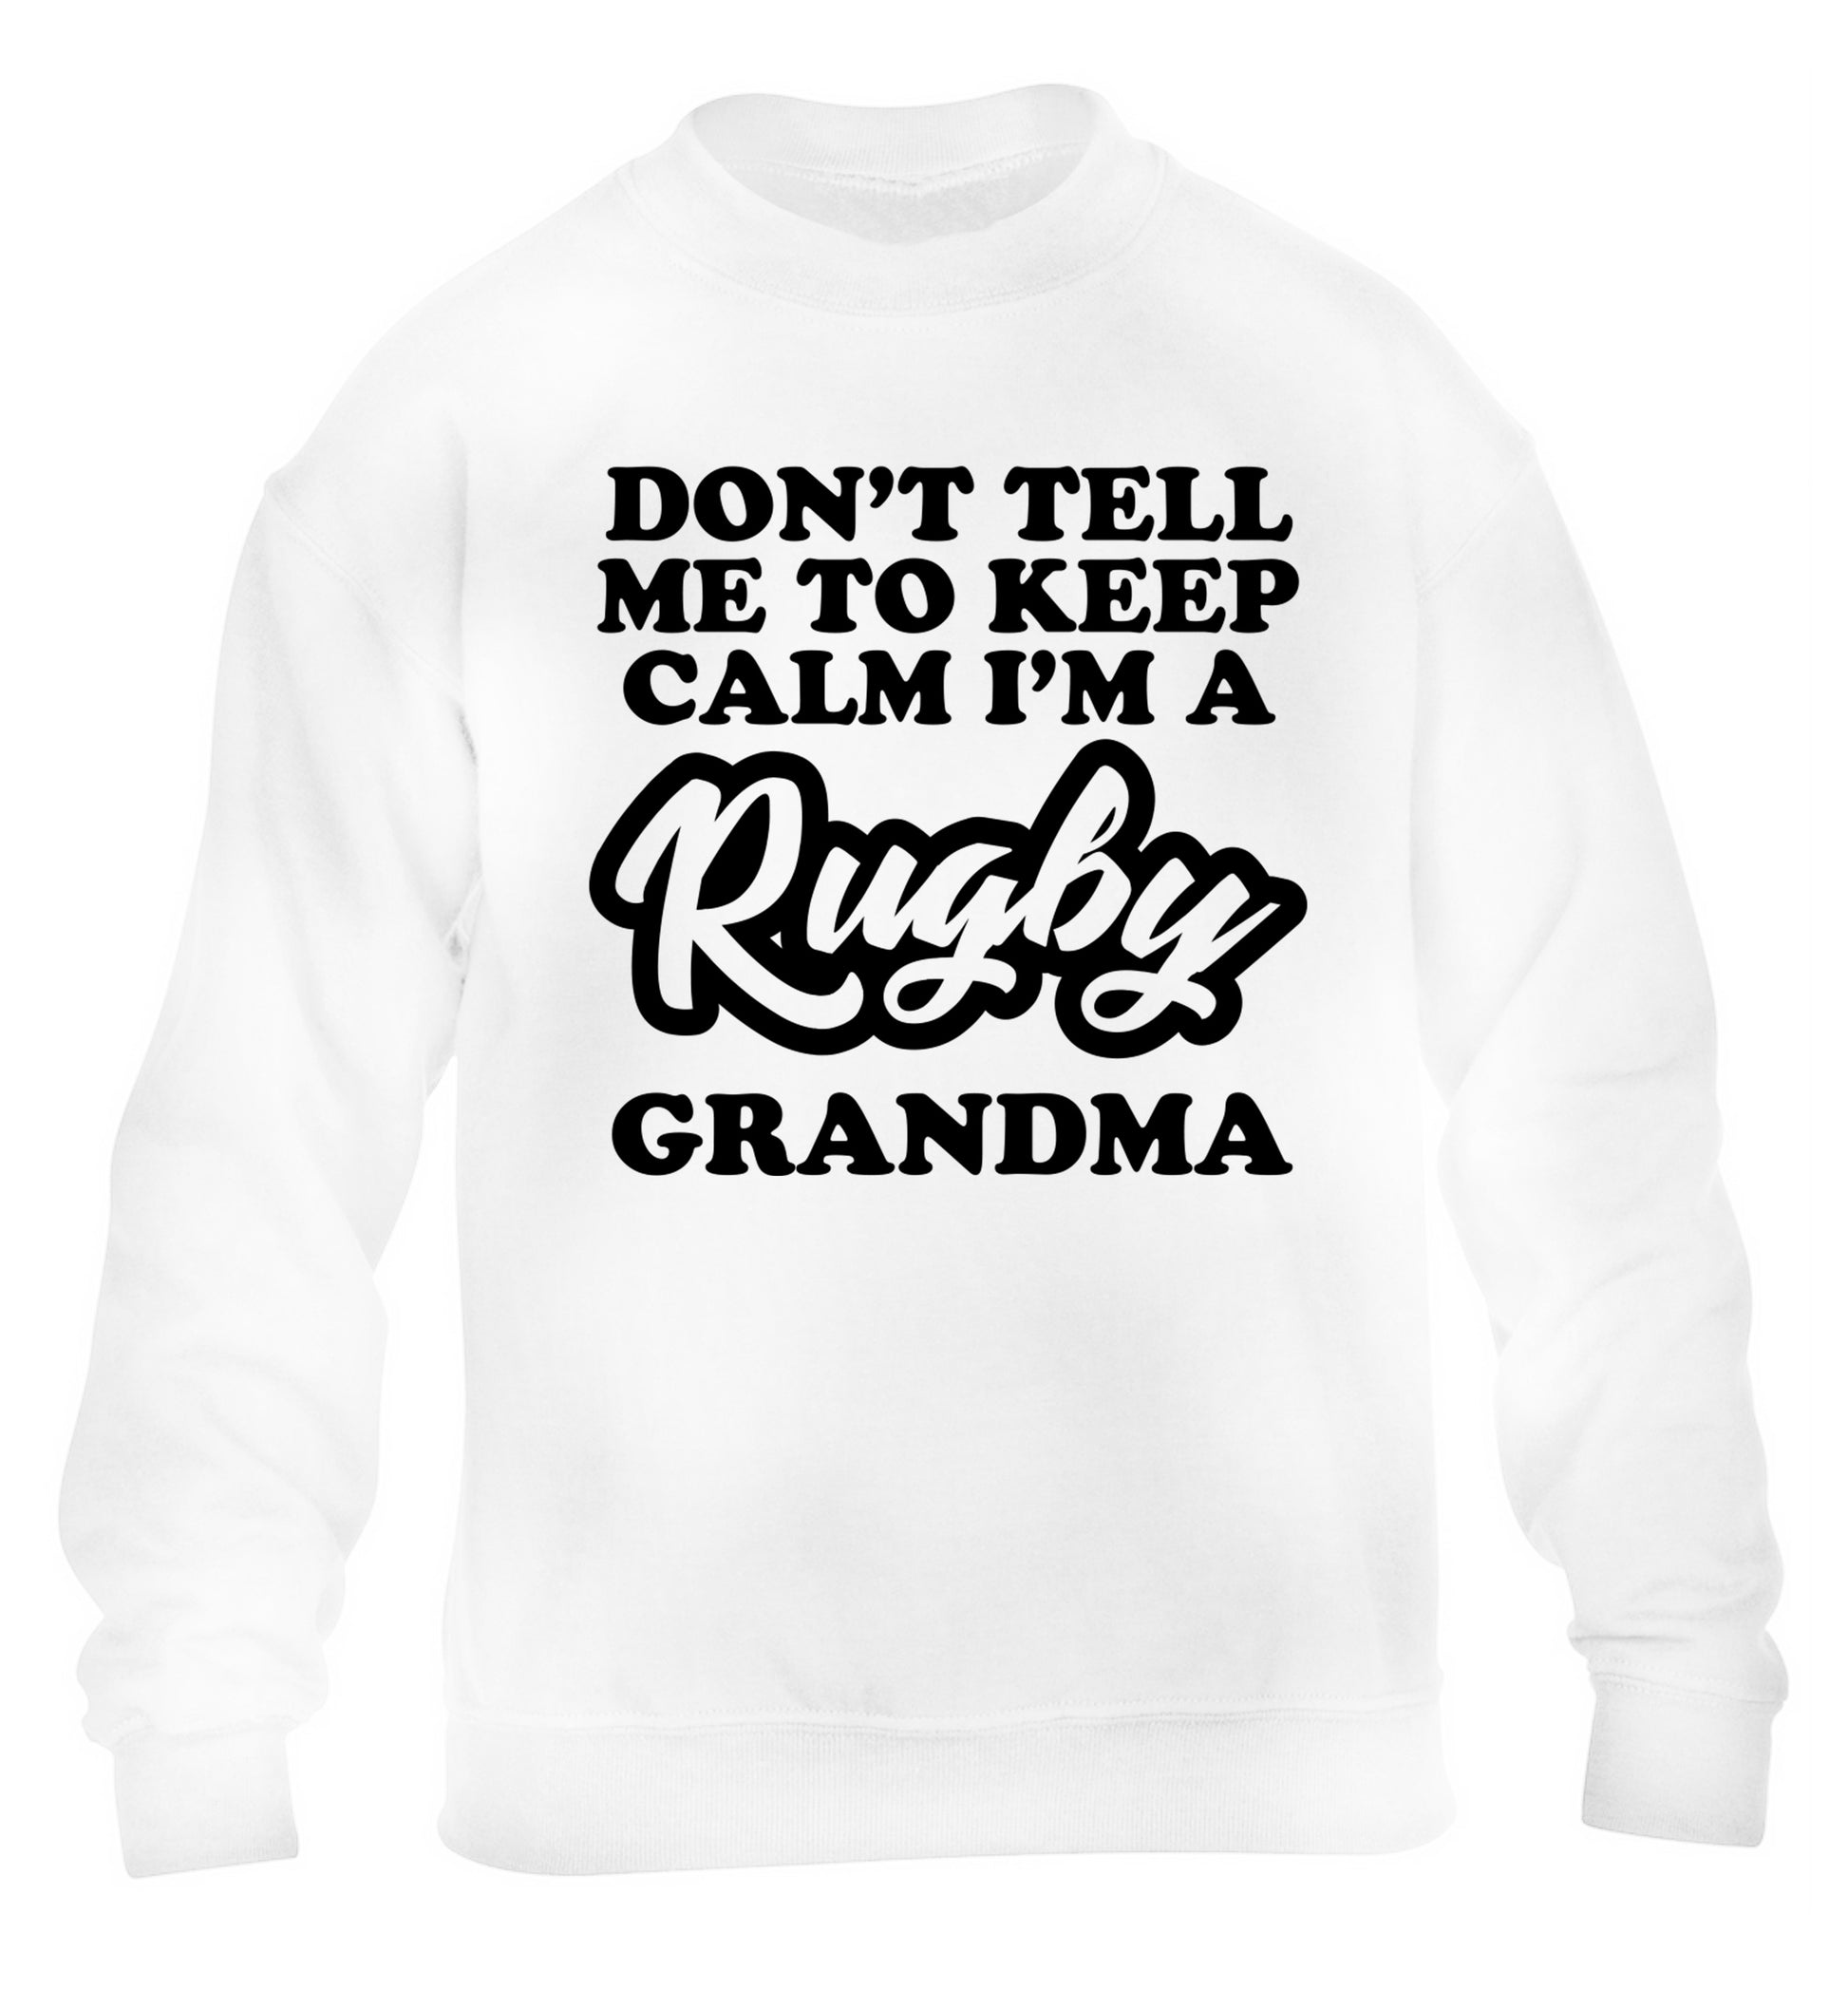 Don't tell me to keep calm I'm a rugby grandma children's white sweater 12-13 Years